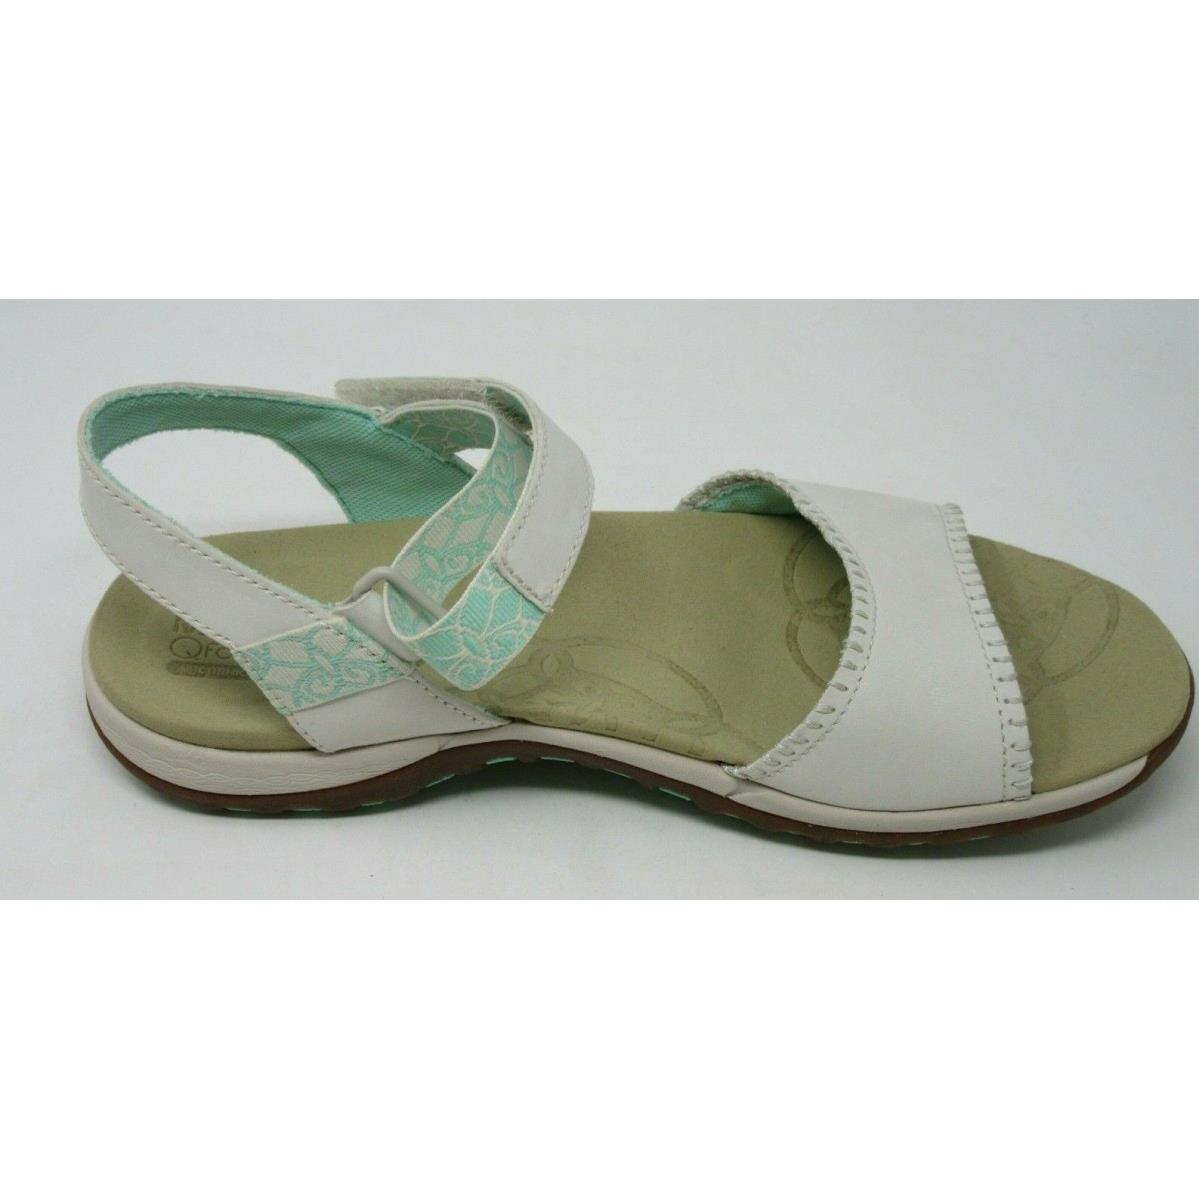 Merrell Women`s Hibiscus Ivory White Slingback Sport Sandals Shoes Size 5/M